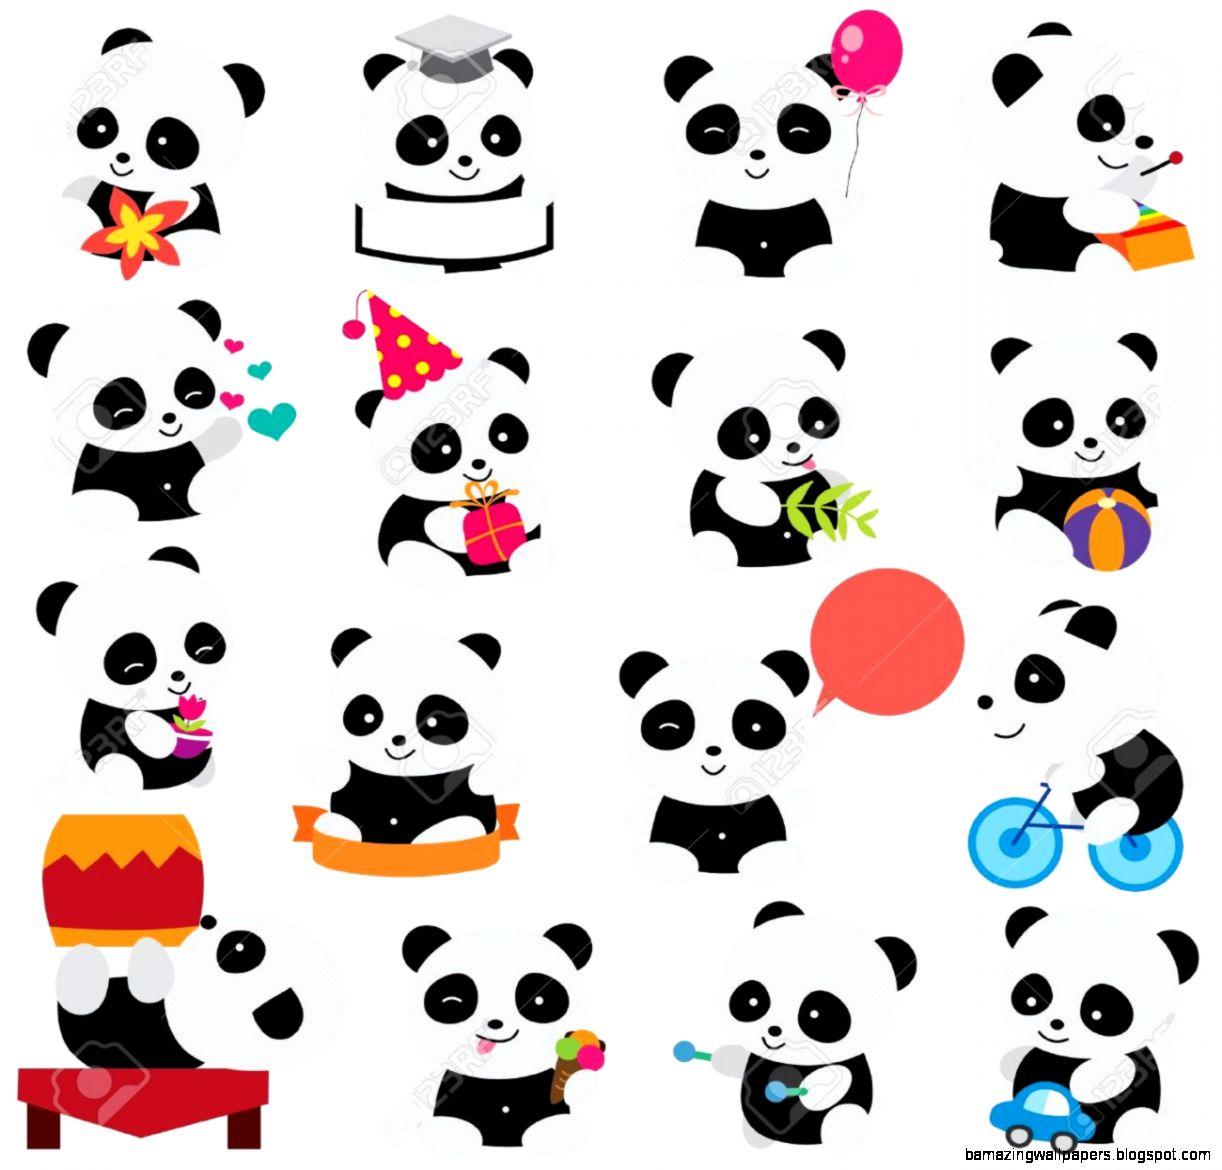 Cute Panda Android Central 1222x1170